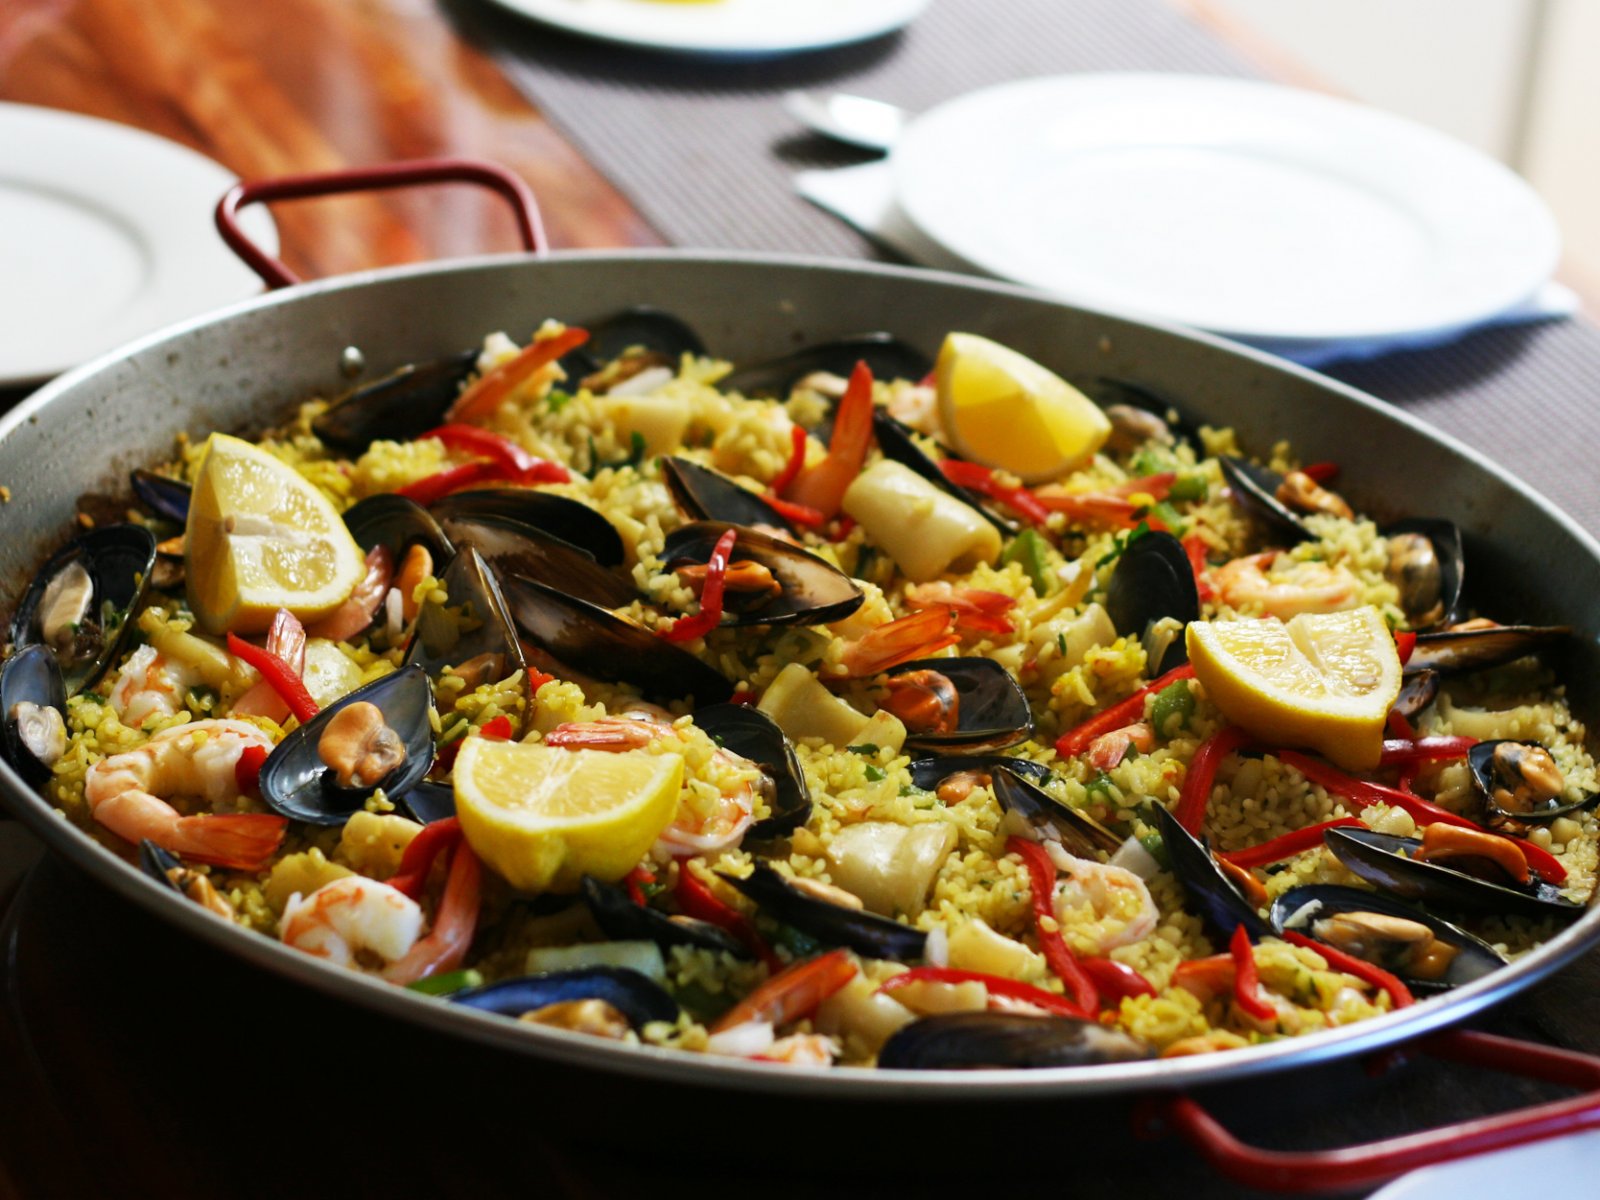 How to try paella in Valencia